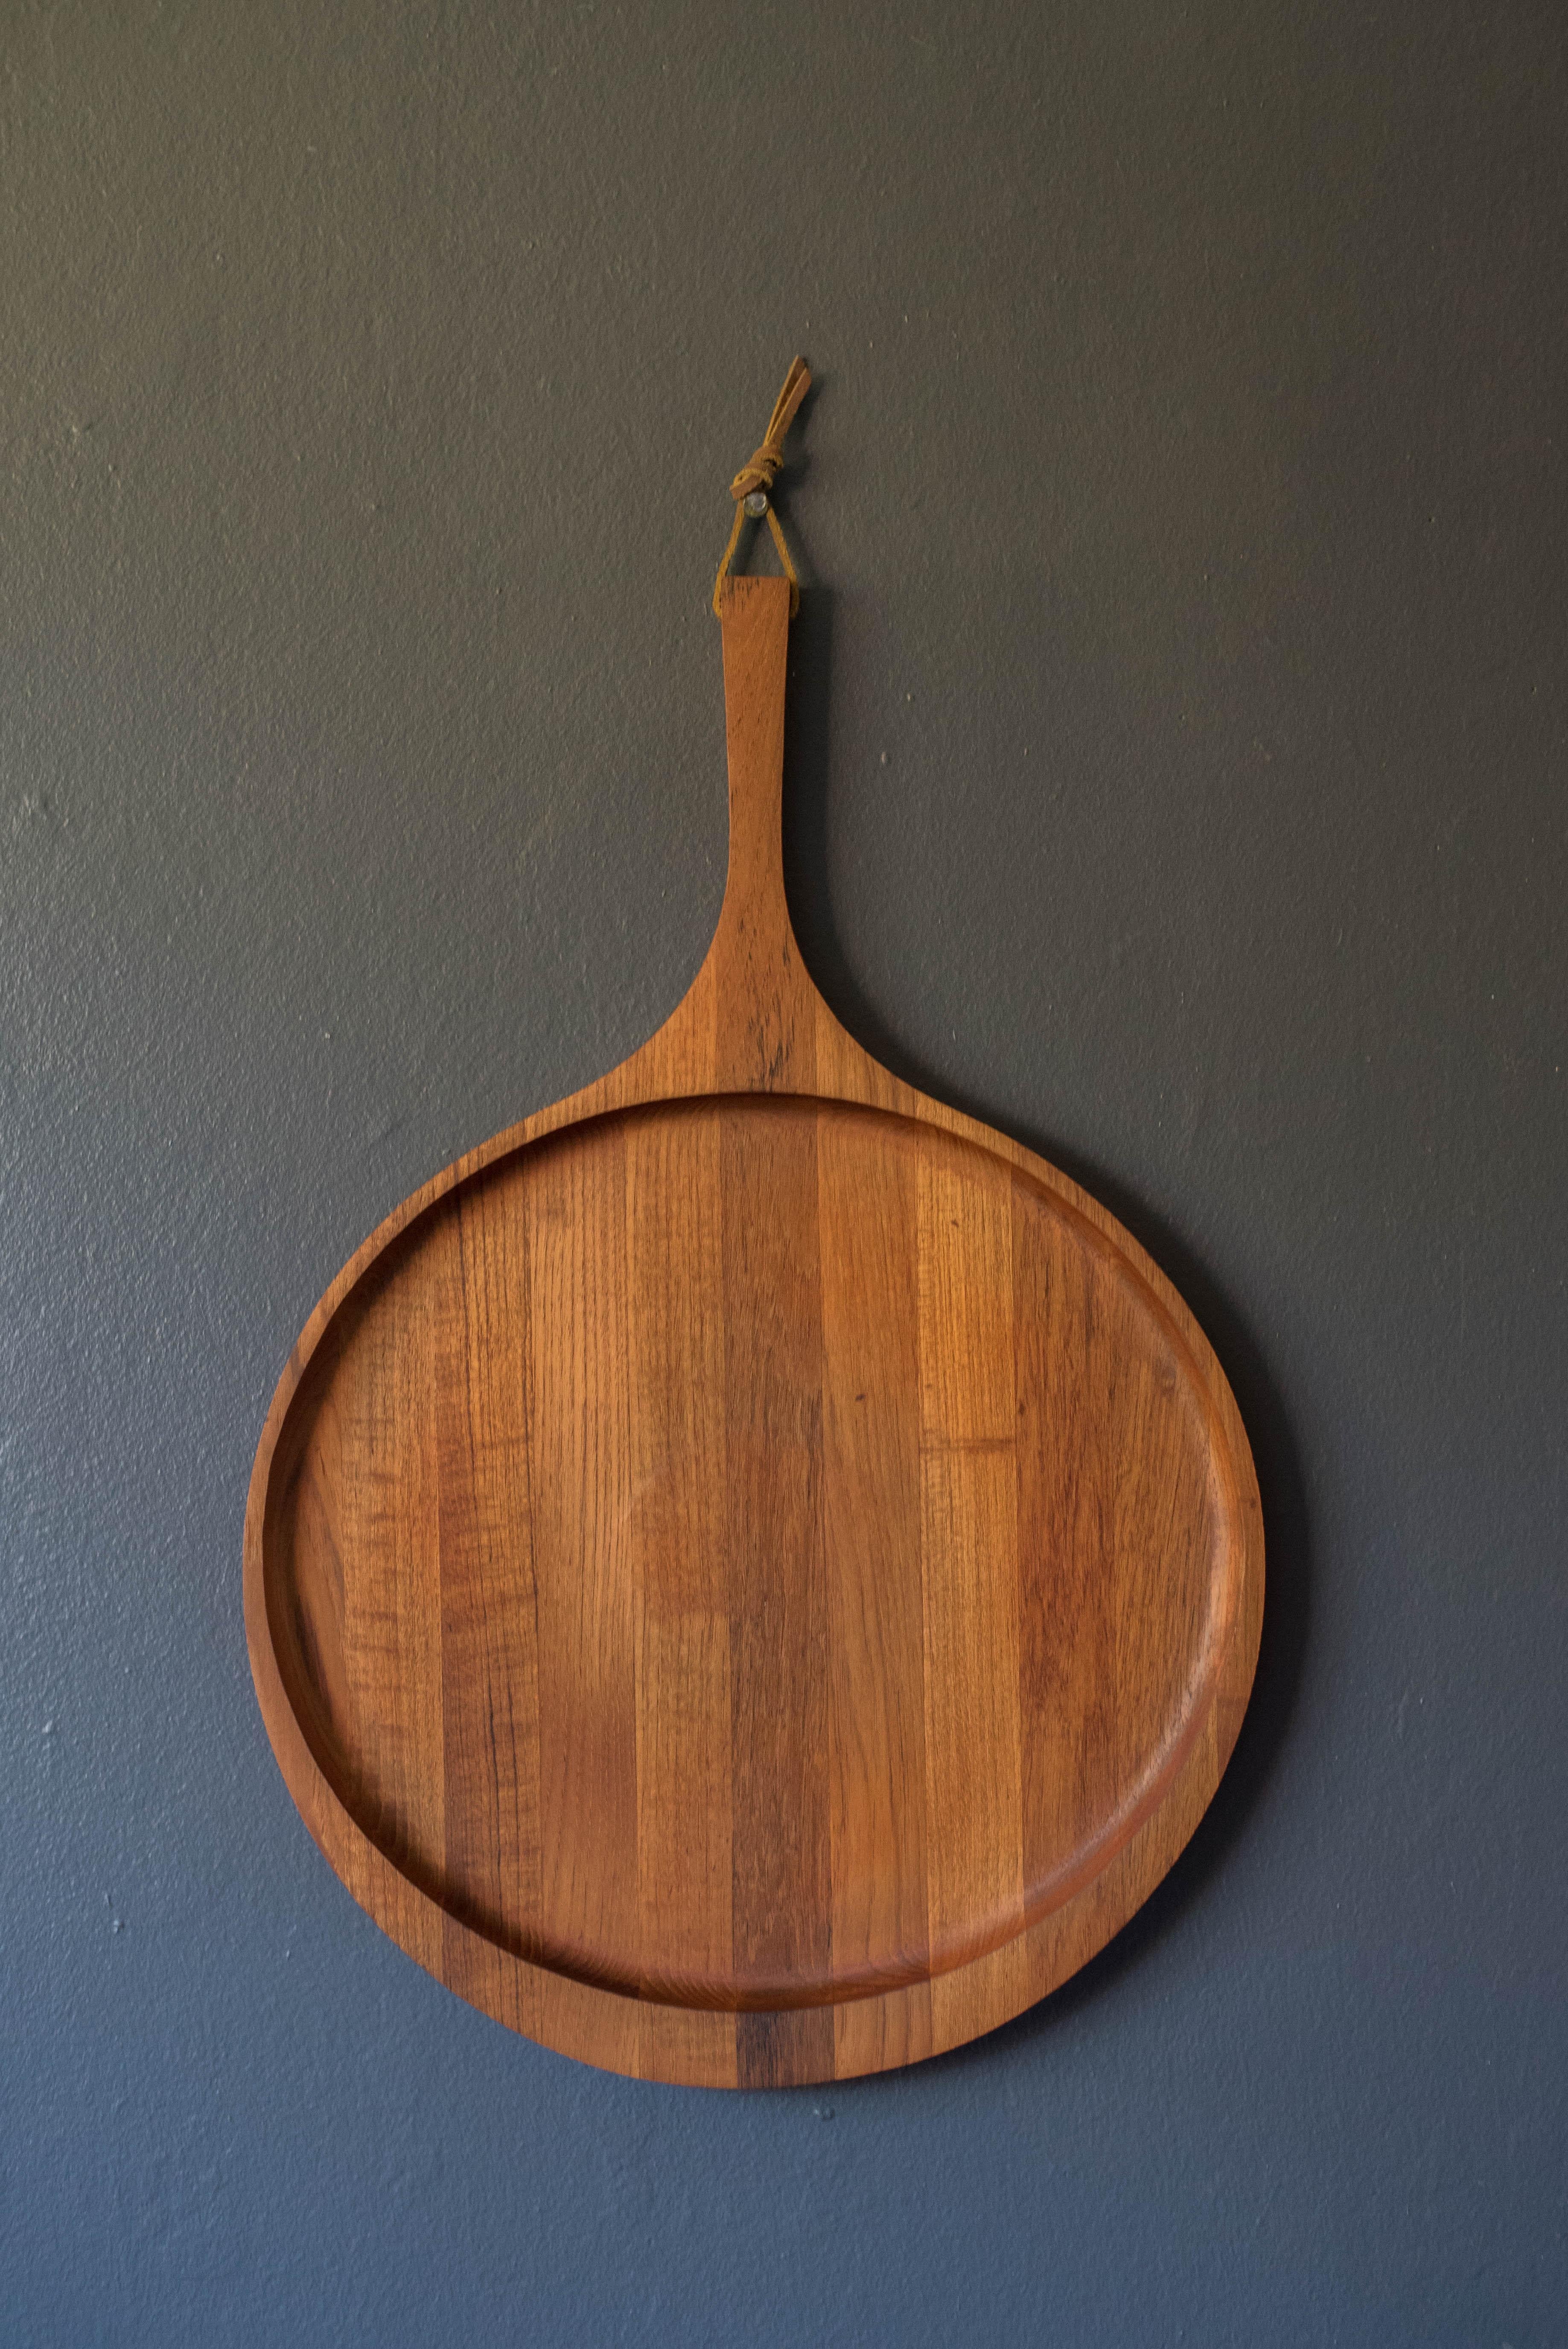 Mid-Century Modern serving platter manufactured by Kjeni, Denmark circa 1960's. This sculptural round tray is crafted in solid planked teak and features a handle with a hanging leather strap perfect to accessorize in the kitchen as a display piece.